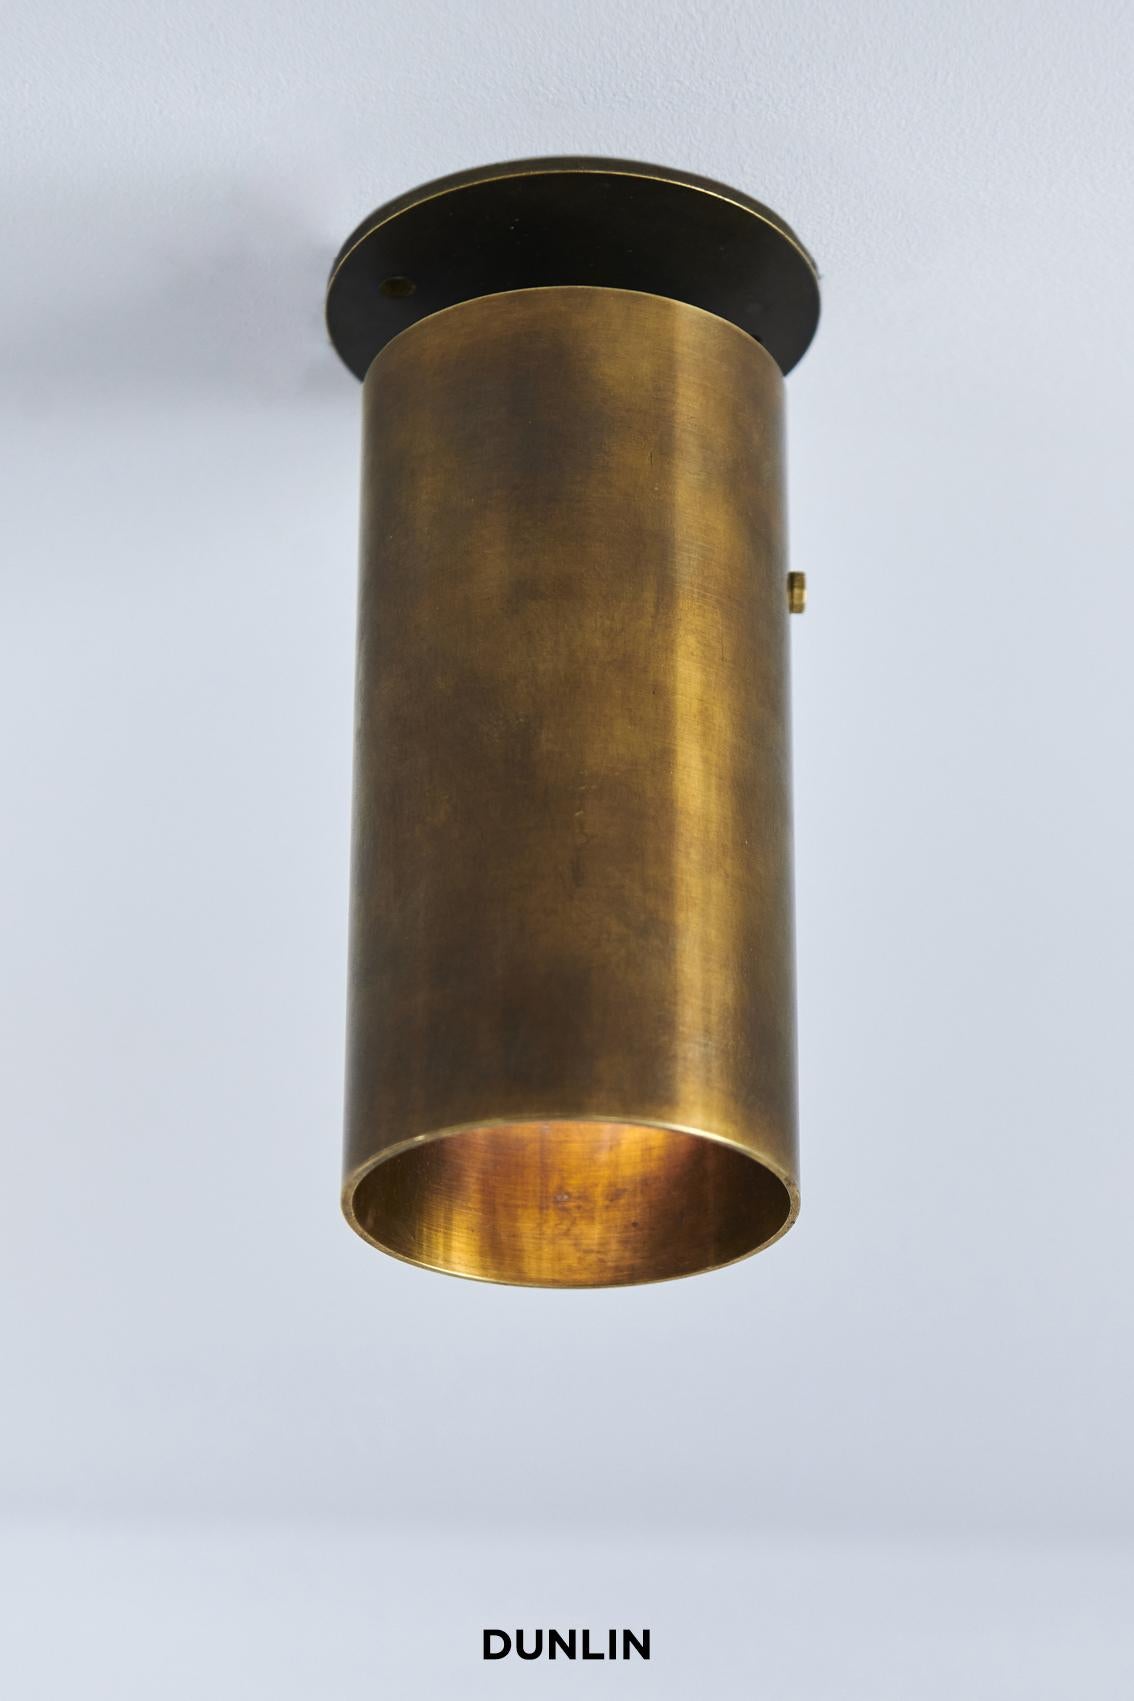 Handmade in solid brass in Australia by Dunlin. 

A heavyweight, solid brass pivoting spotlight. 
A cast brass ball pivot allows the light to rotate around its stem. 

14.5 cm long x 6.3 cm dia
Finish: Tarnished Raw Brass

Available in Noir or